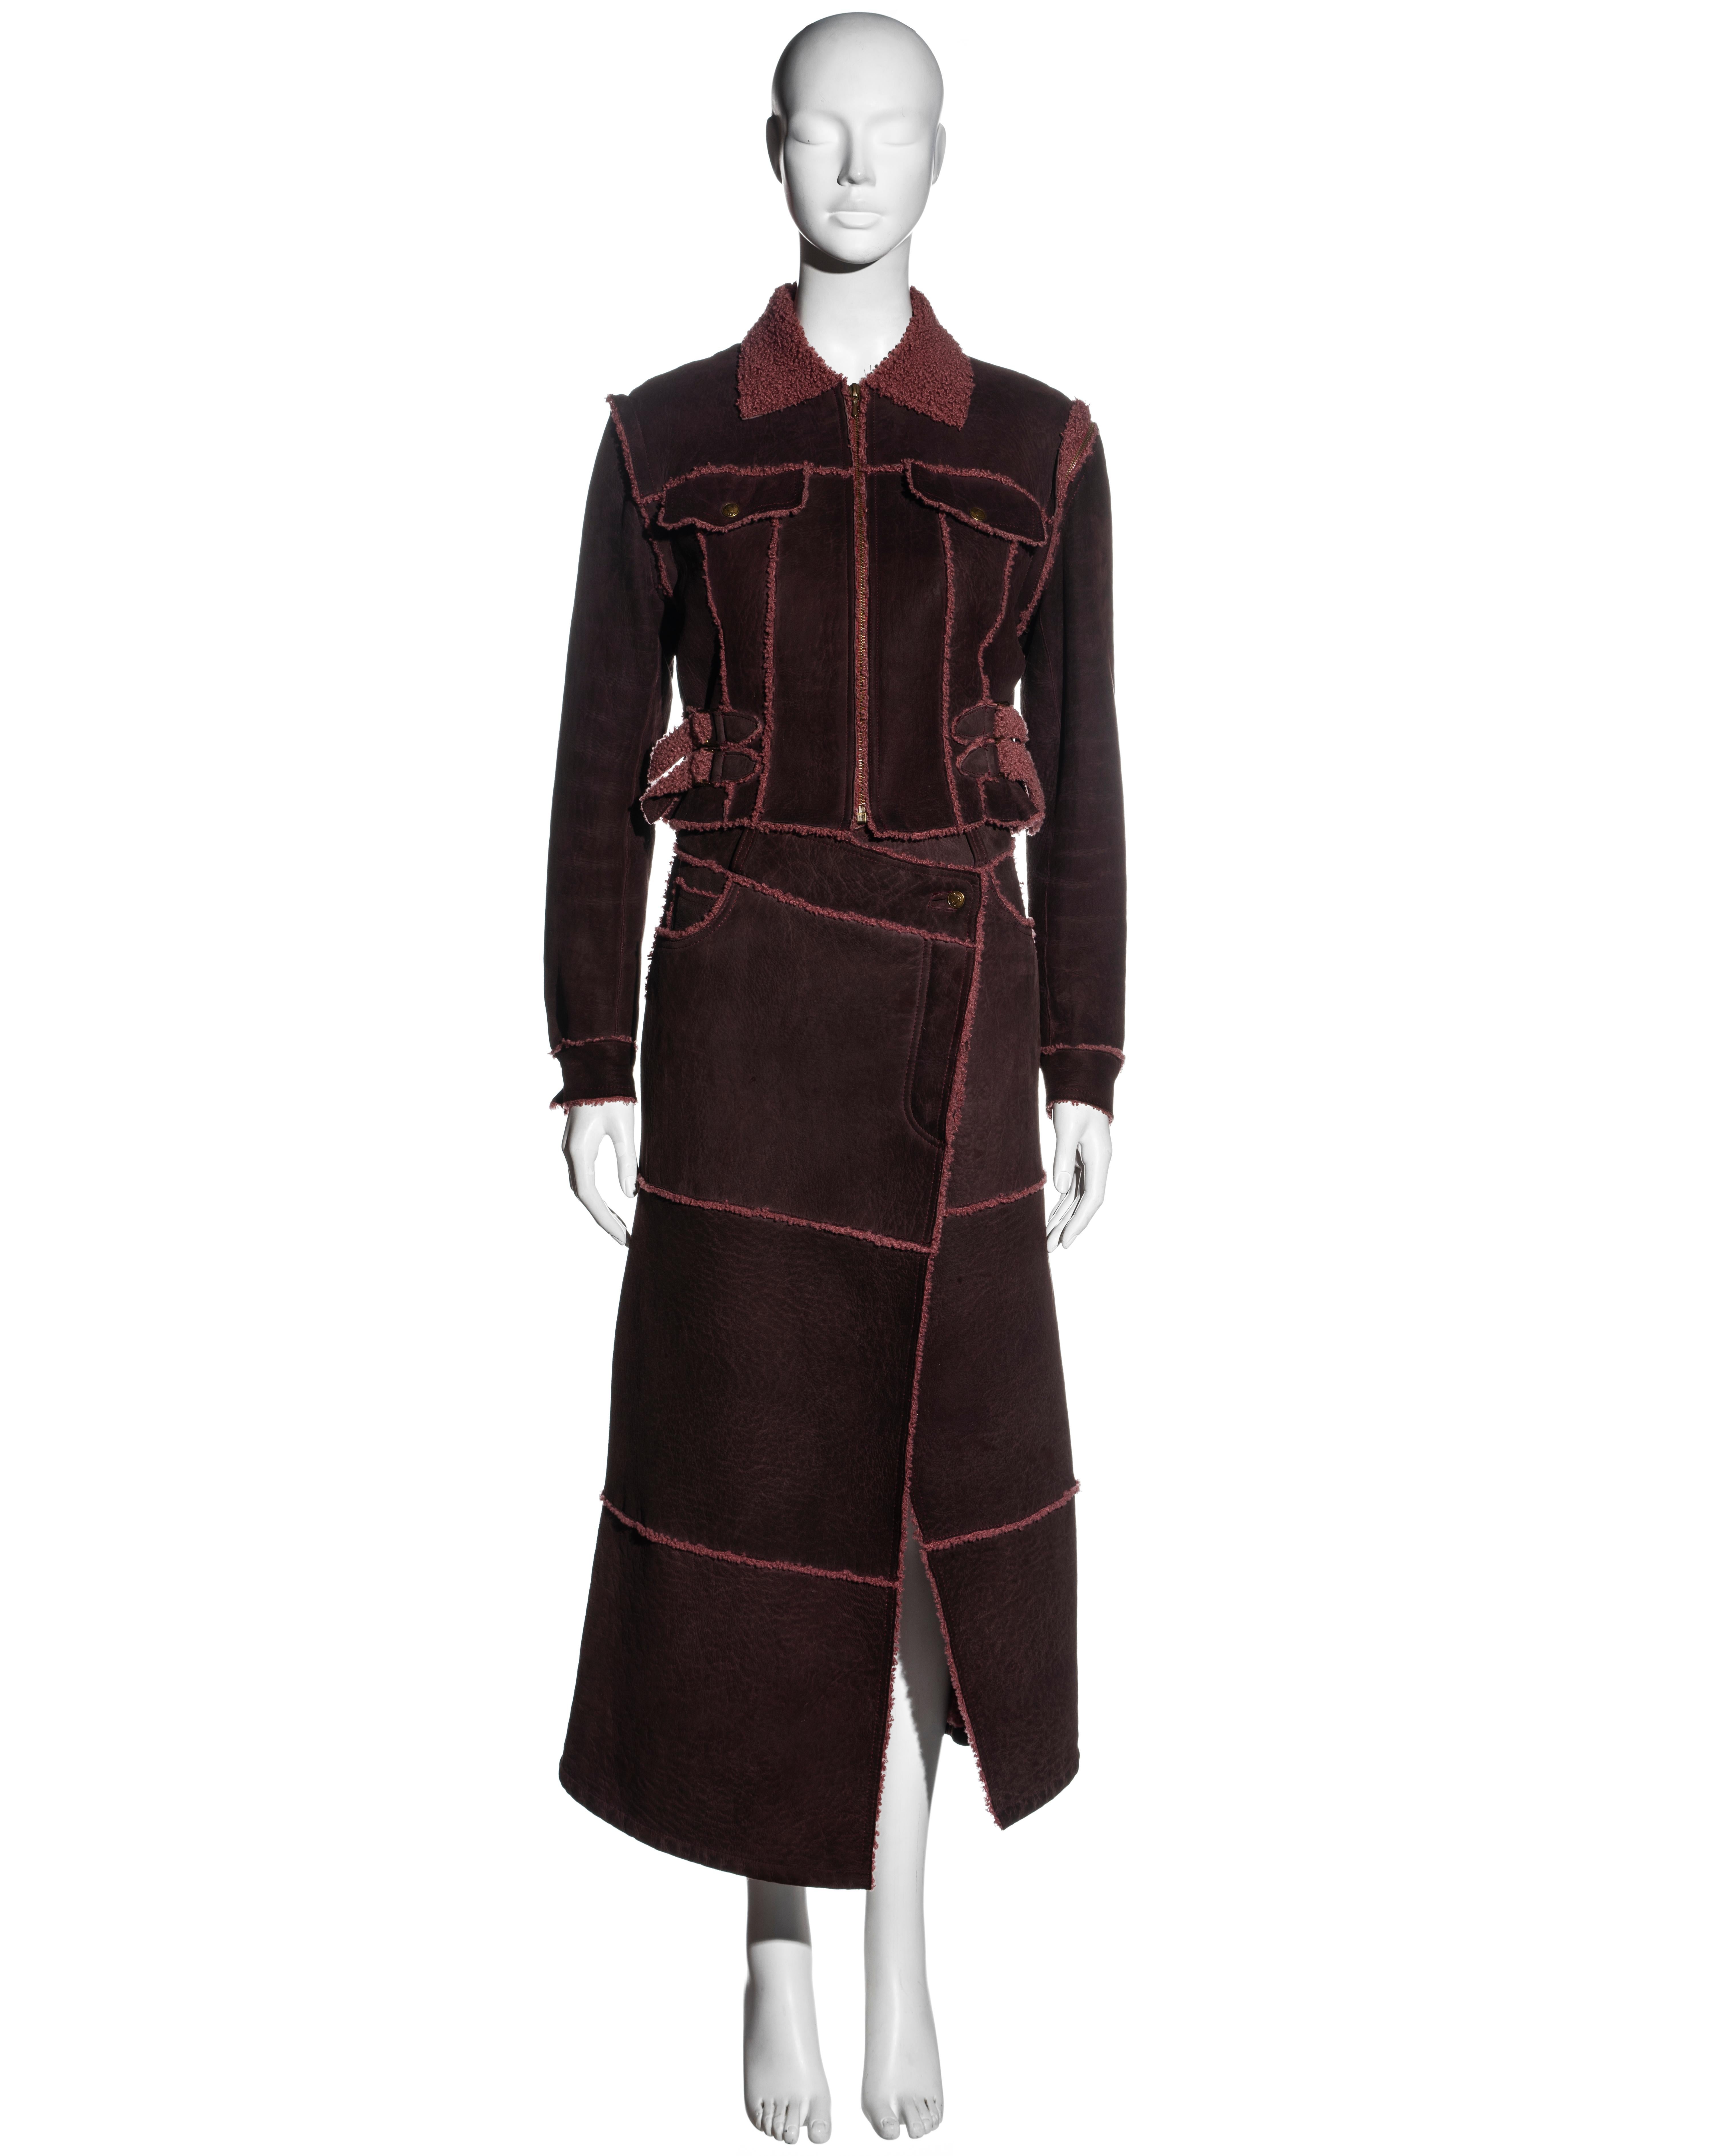 ▪ Christian Dior burgundy shearling 2-piece set 
▪ Designed by John Galliano 
▪ Fitted jacket 
▪ Maxi wrap skirt 
▪ Inverted seams 
▪ Detachable sleeves 
▪ Buckle ties at the waist 
▪ FR 38 - UK 10 - US 6
▪ 100% Shearling
▪ Fall-Winter 2000